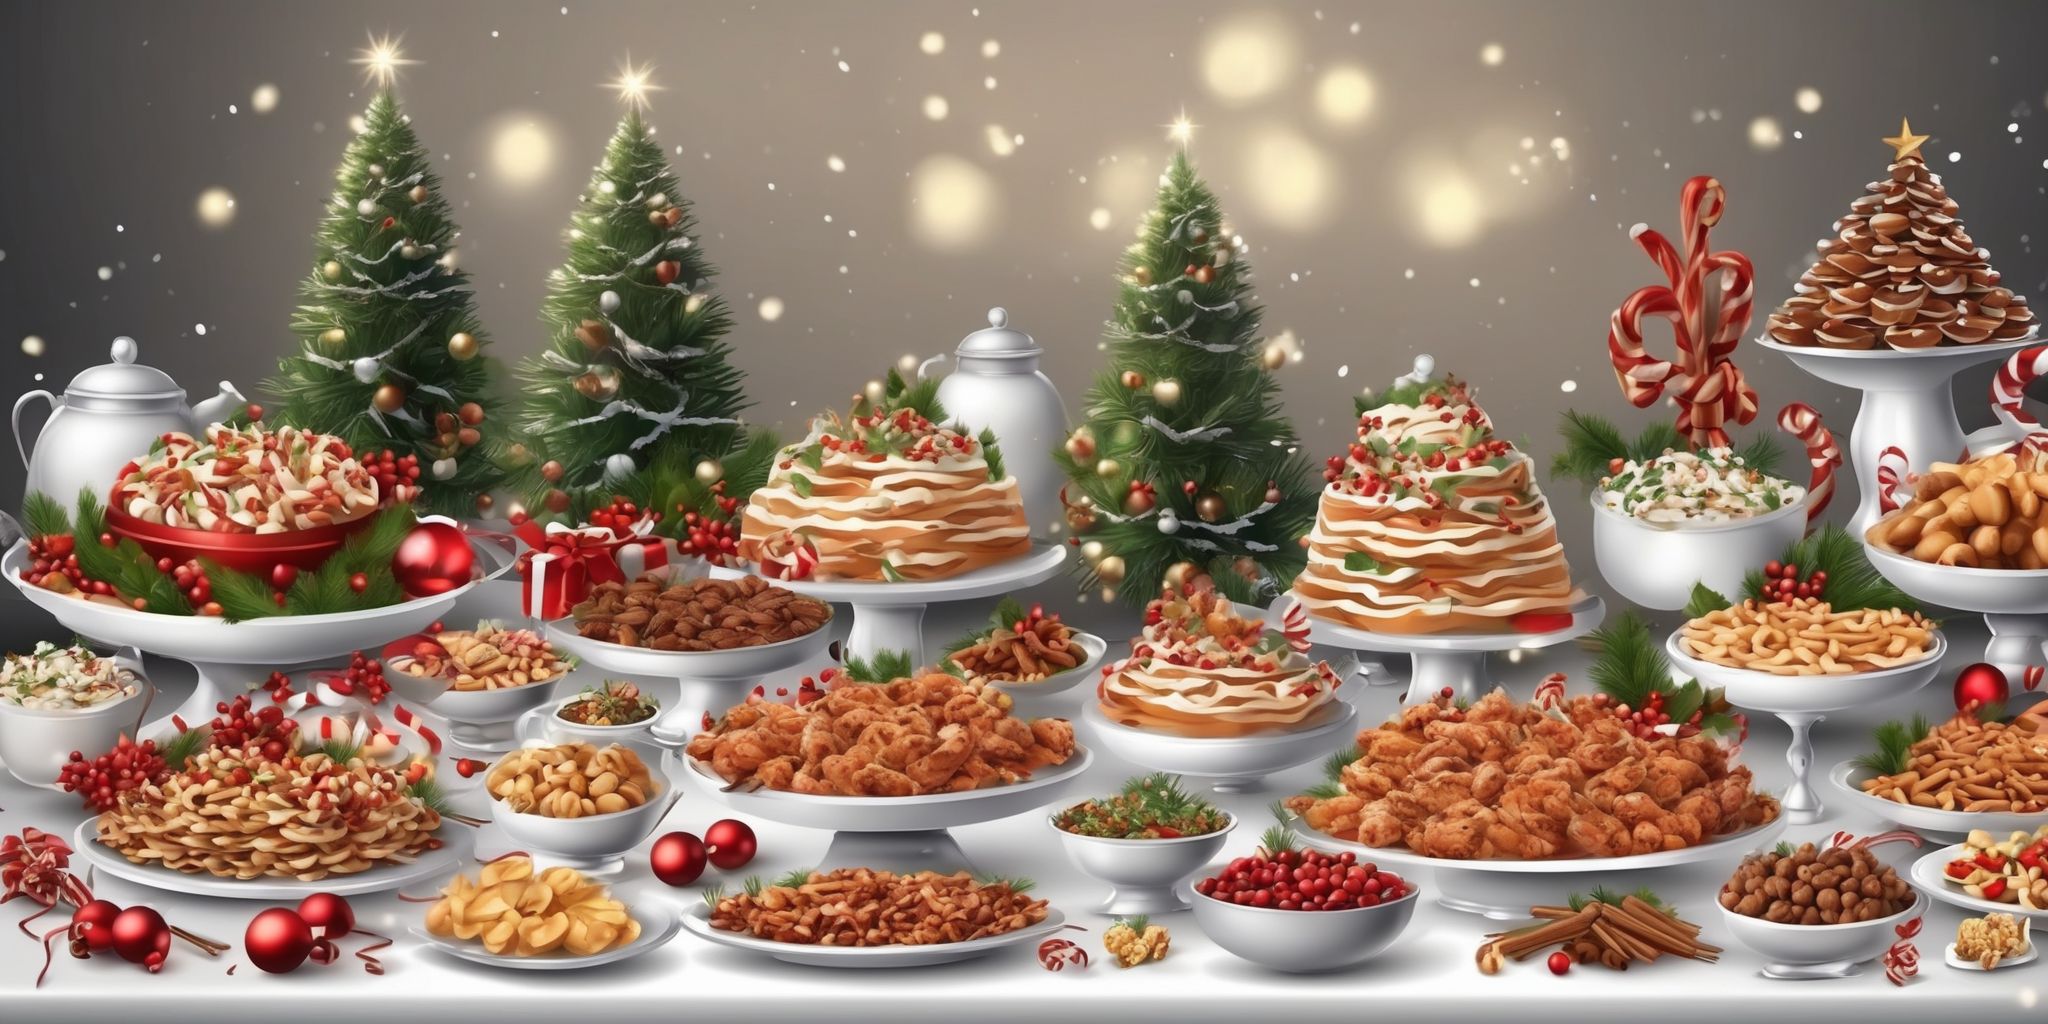 Food buffet in realistic Christmas style